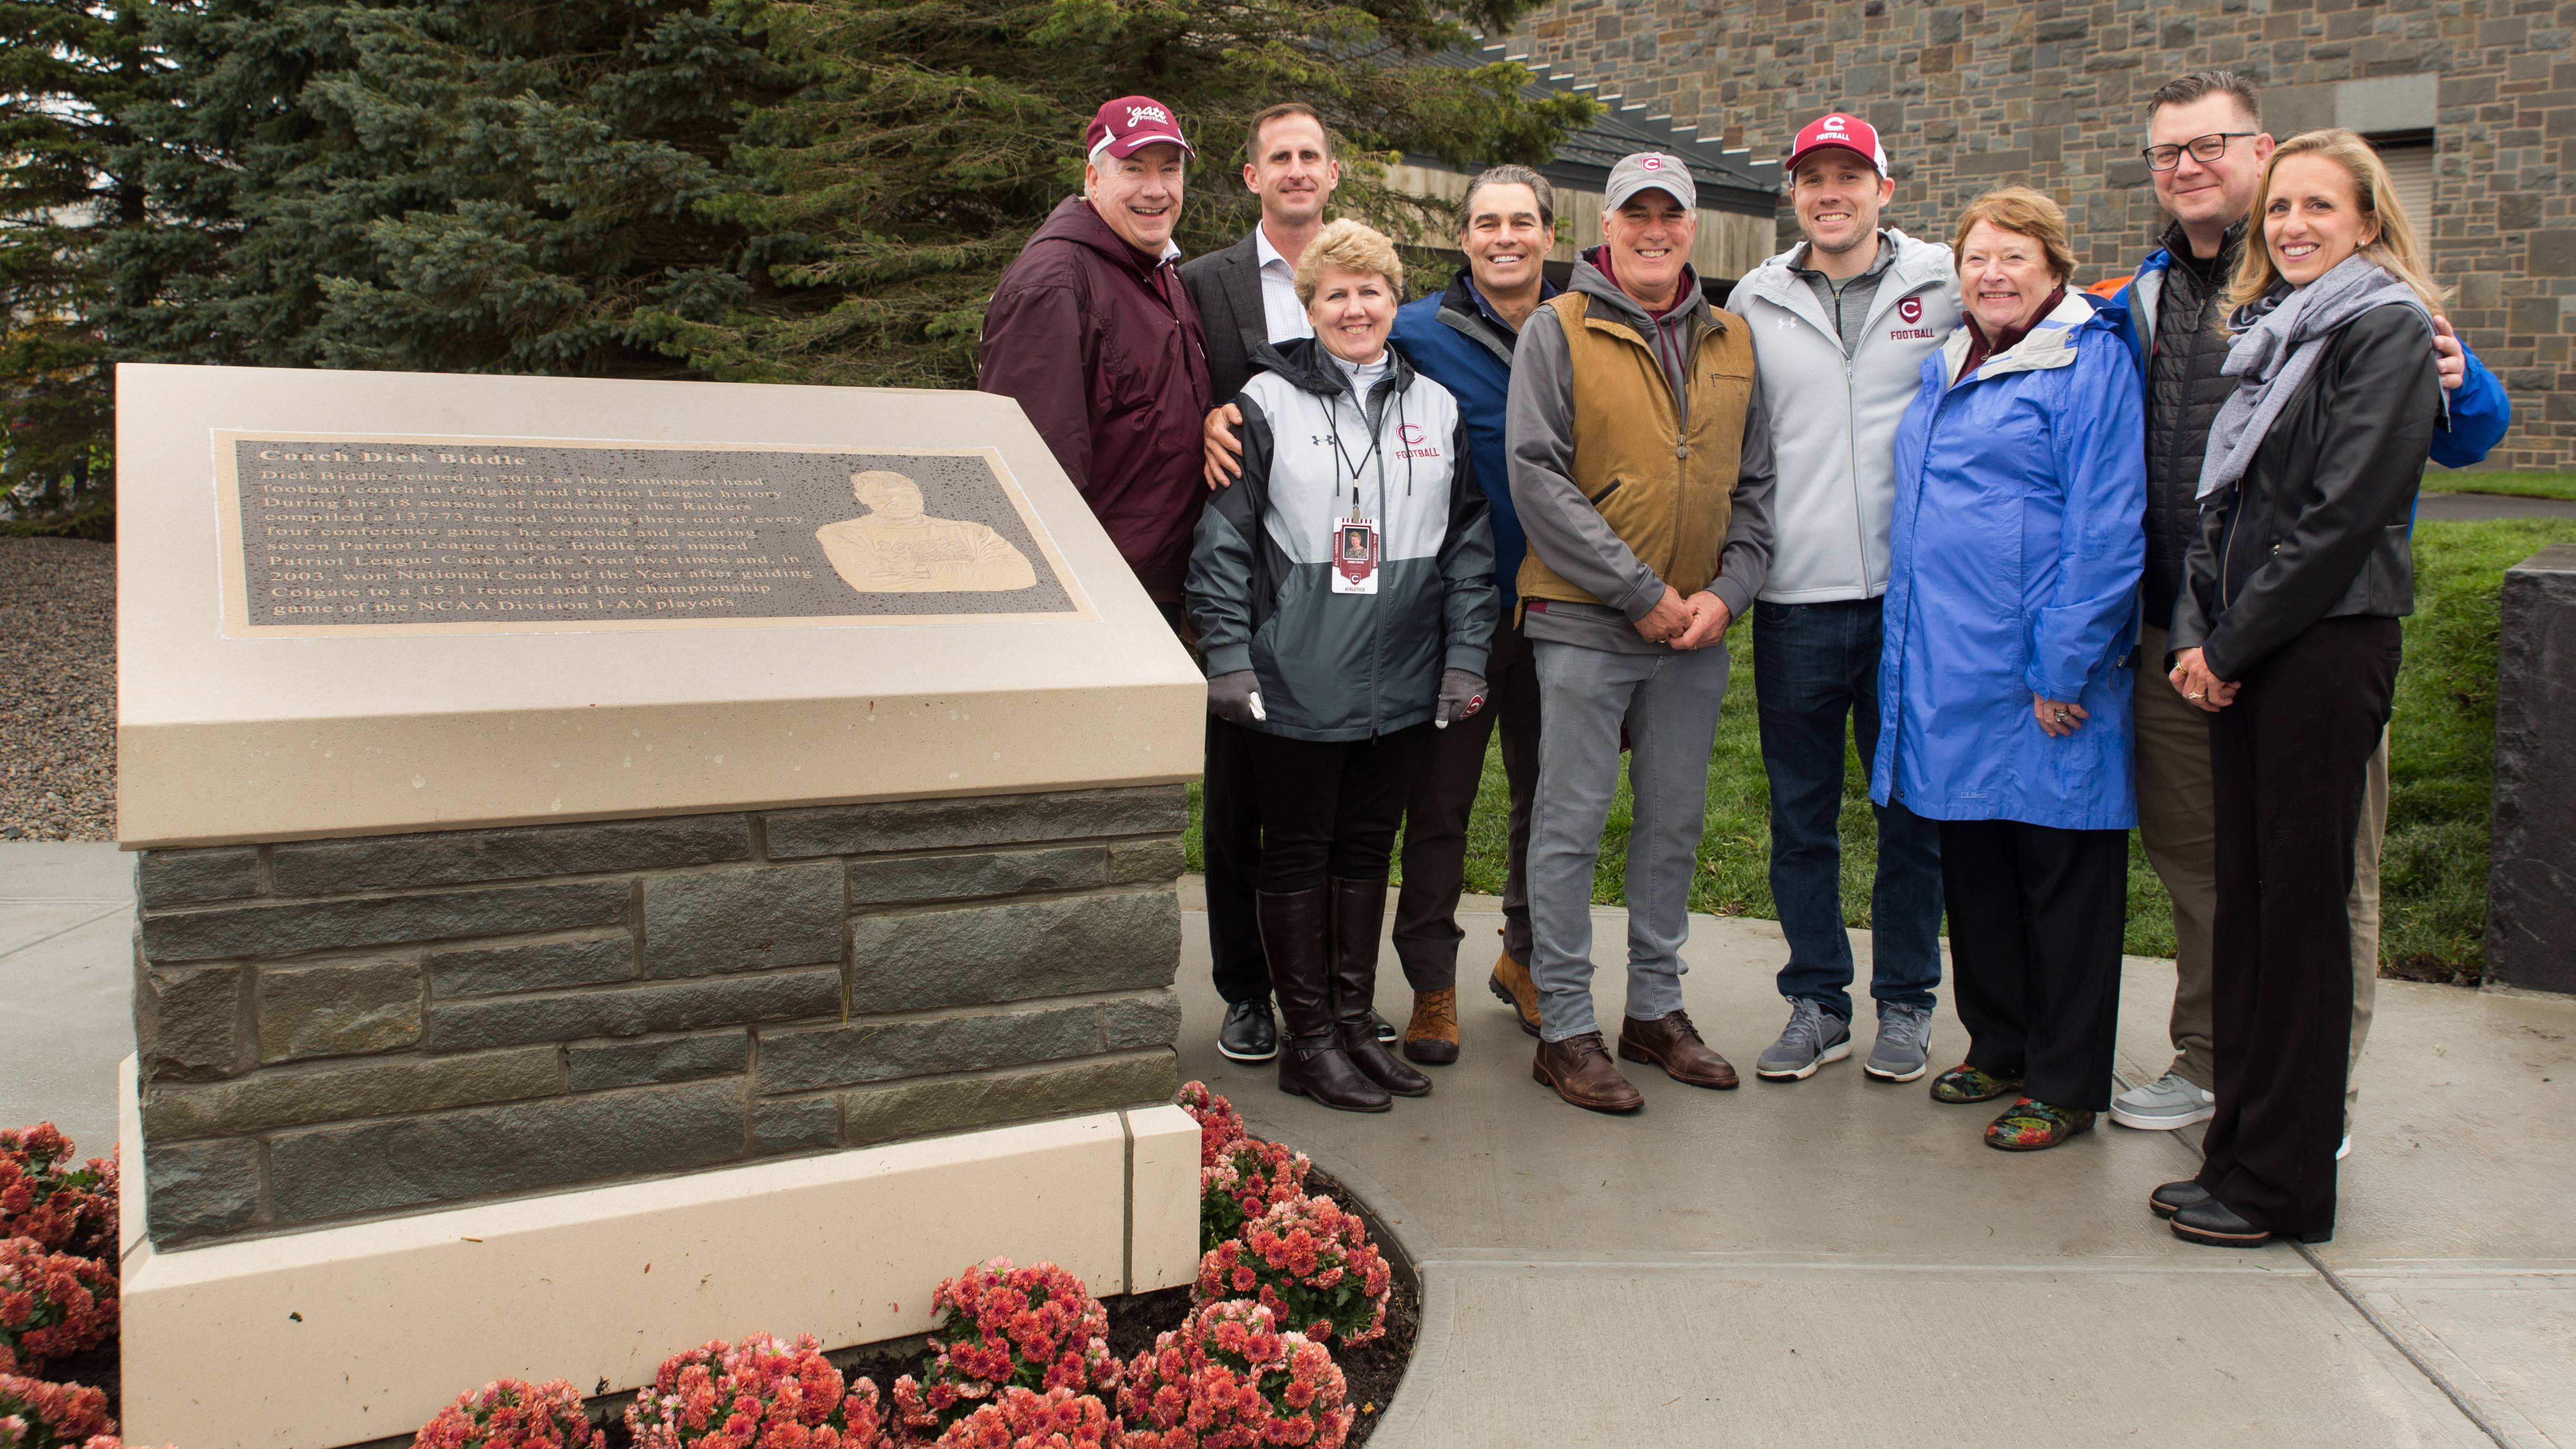 Alumni pose in front of new Biddle Monument